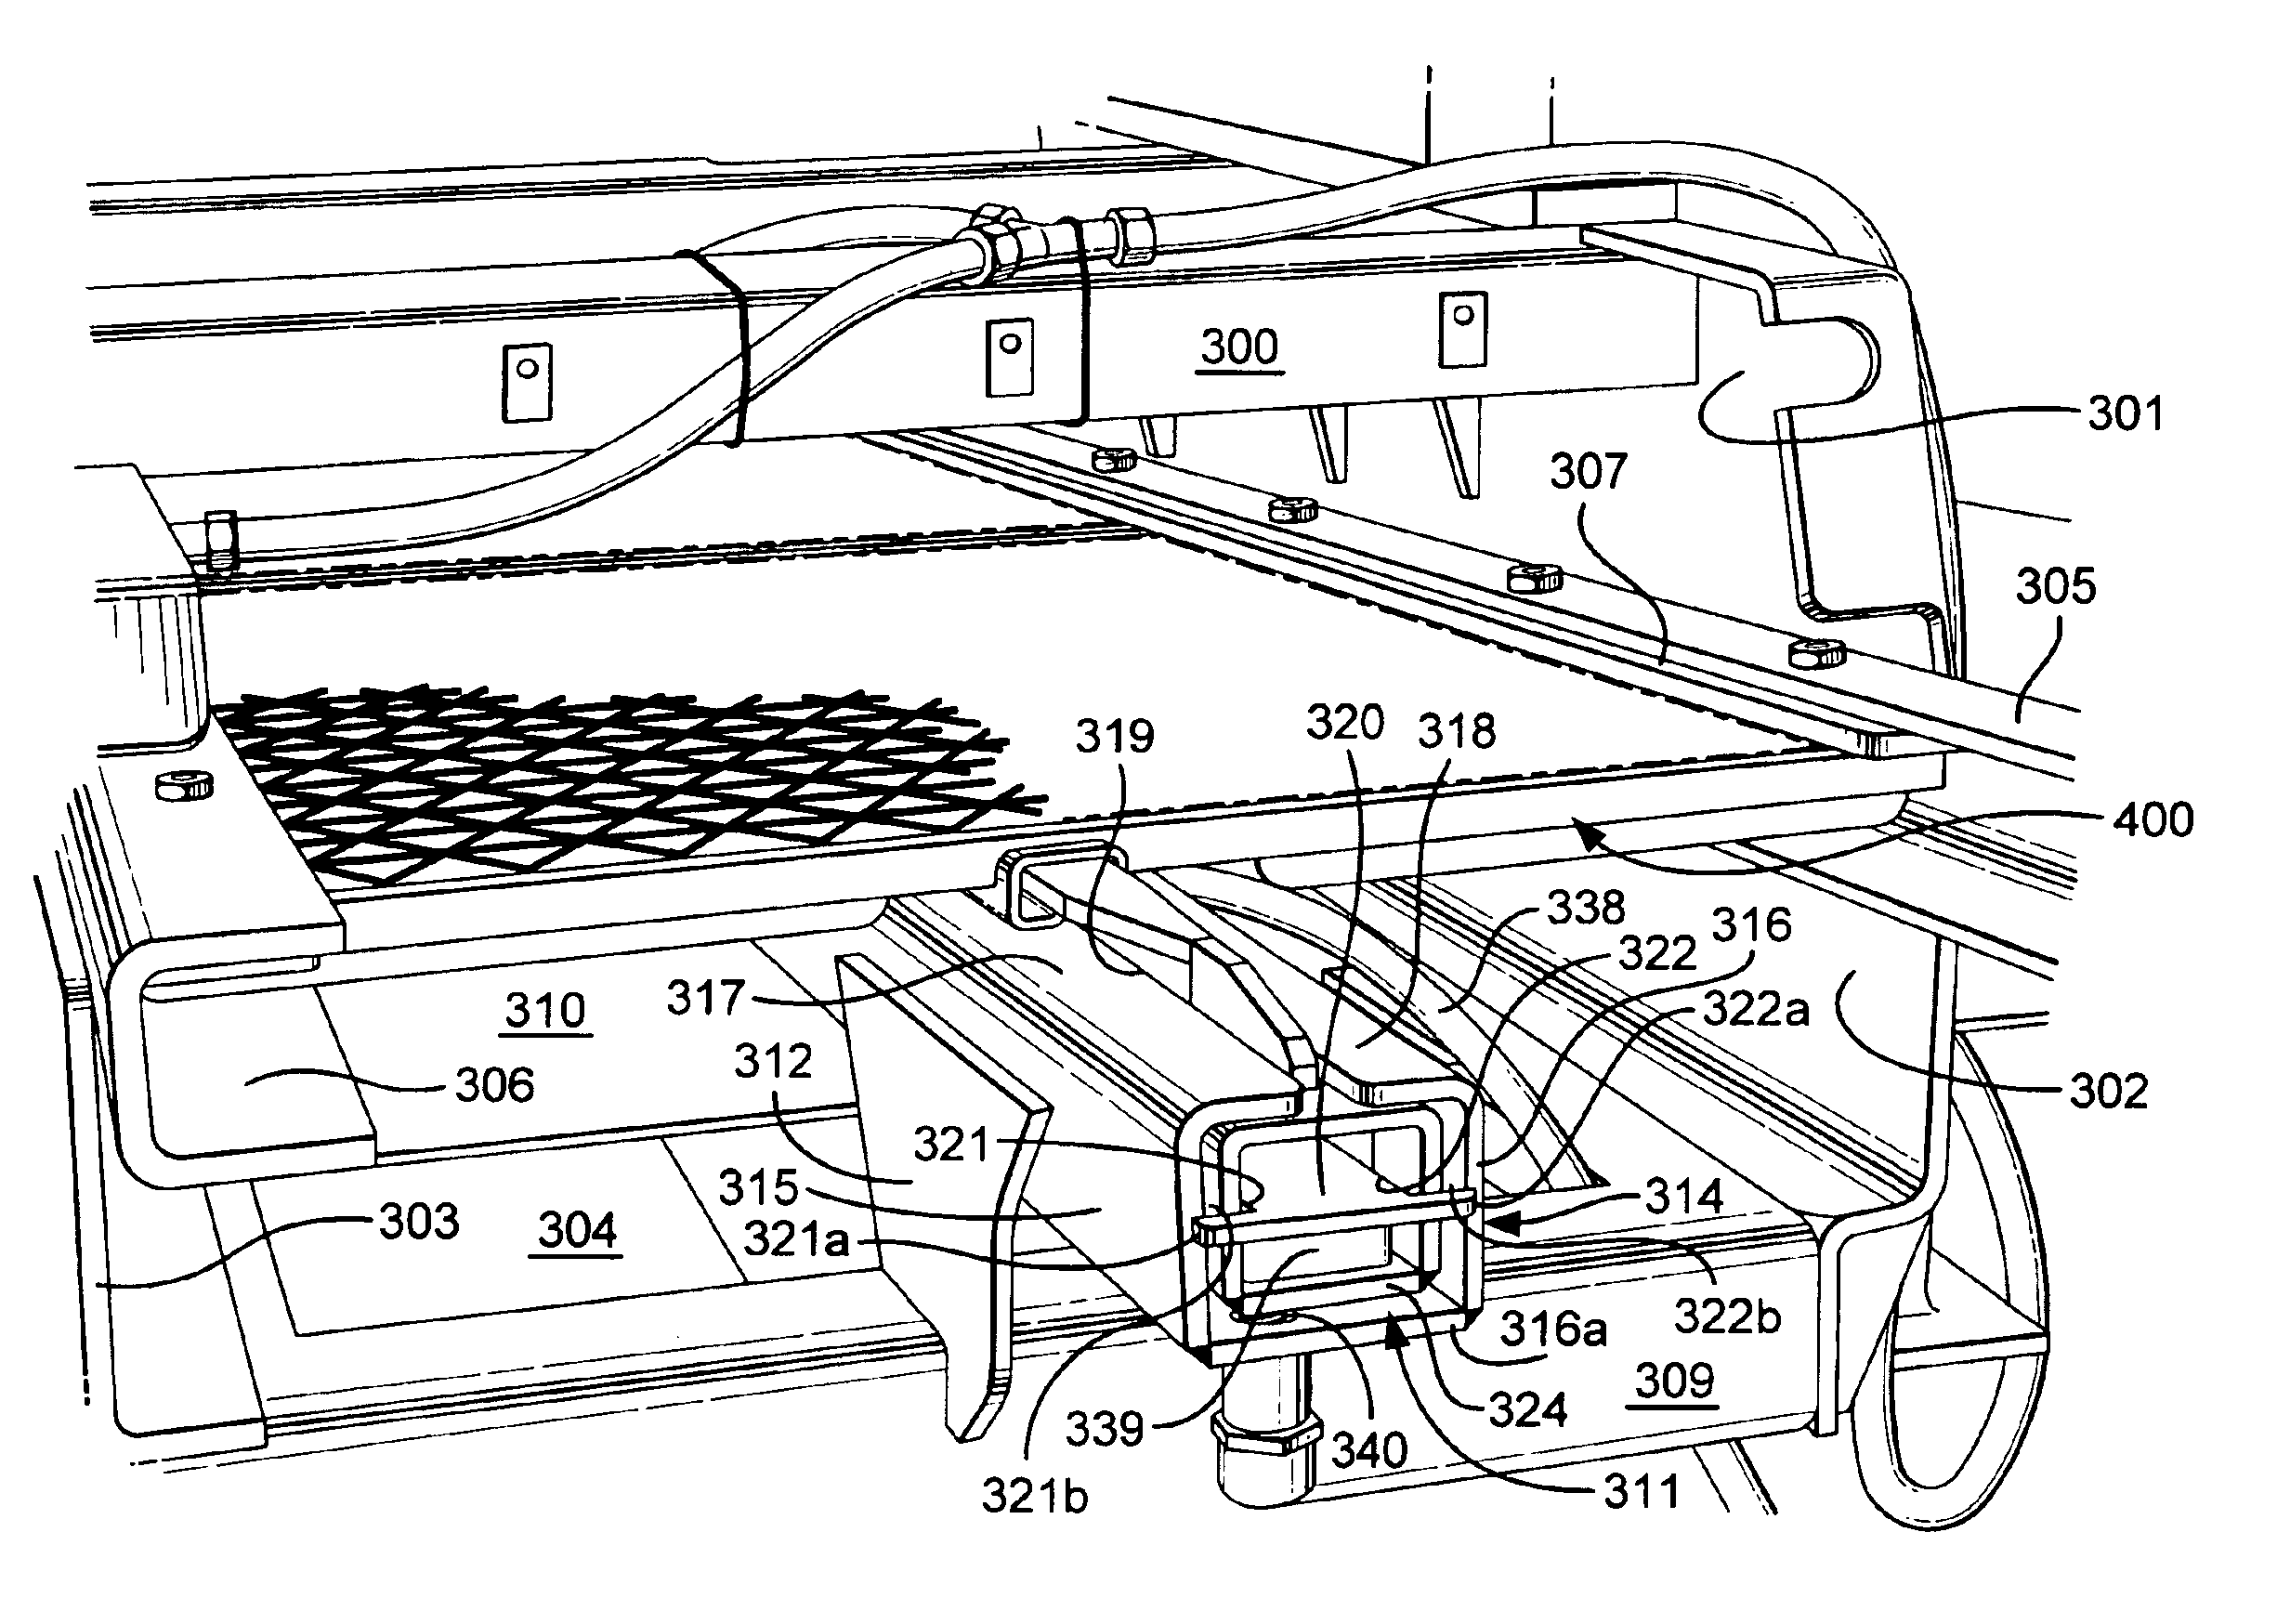 Centrally supported screen assembly